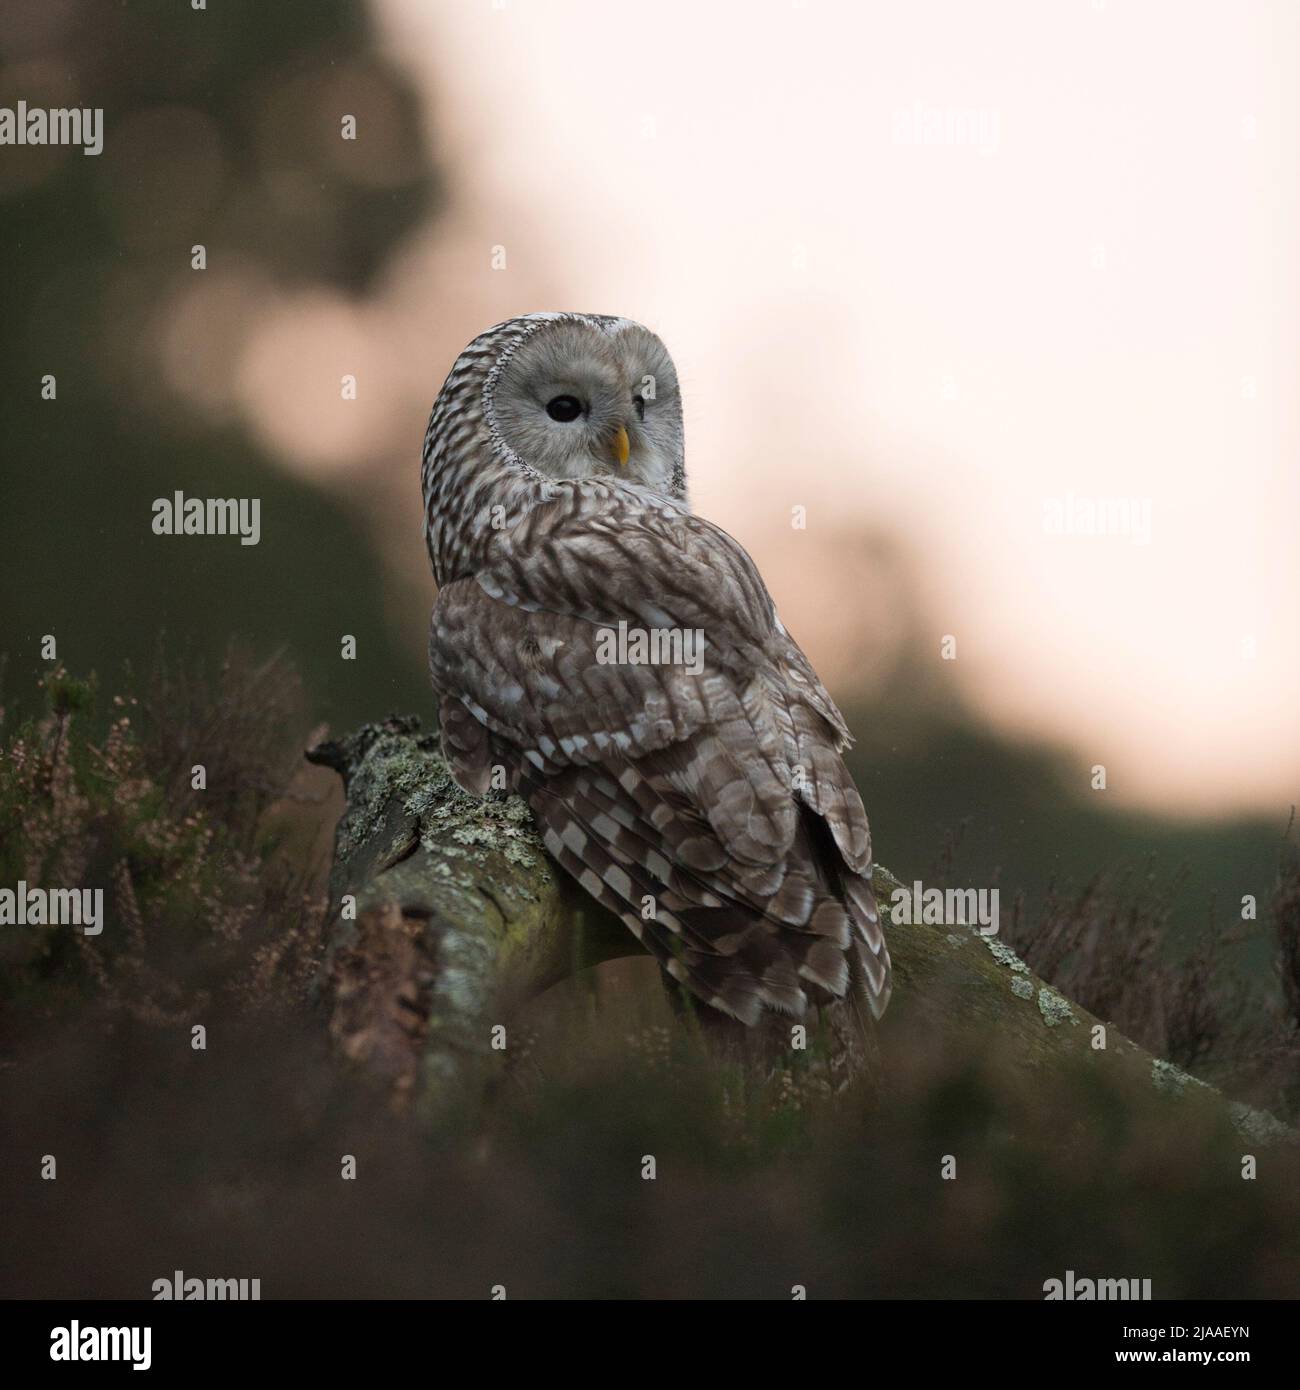 Ural Owl / Habichtskauz ( Strix uralensis ) perched on a piece of wood, surrounded by boreal undergrowth and woods, watching over its shoulder, Europe Stock Photo